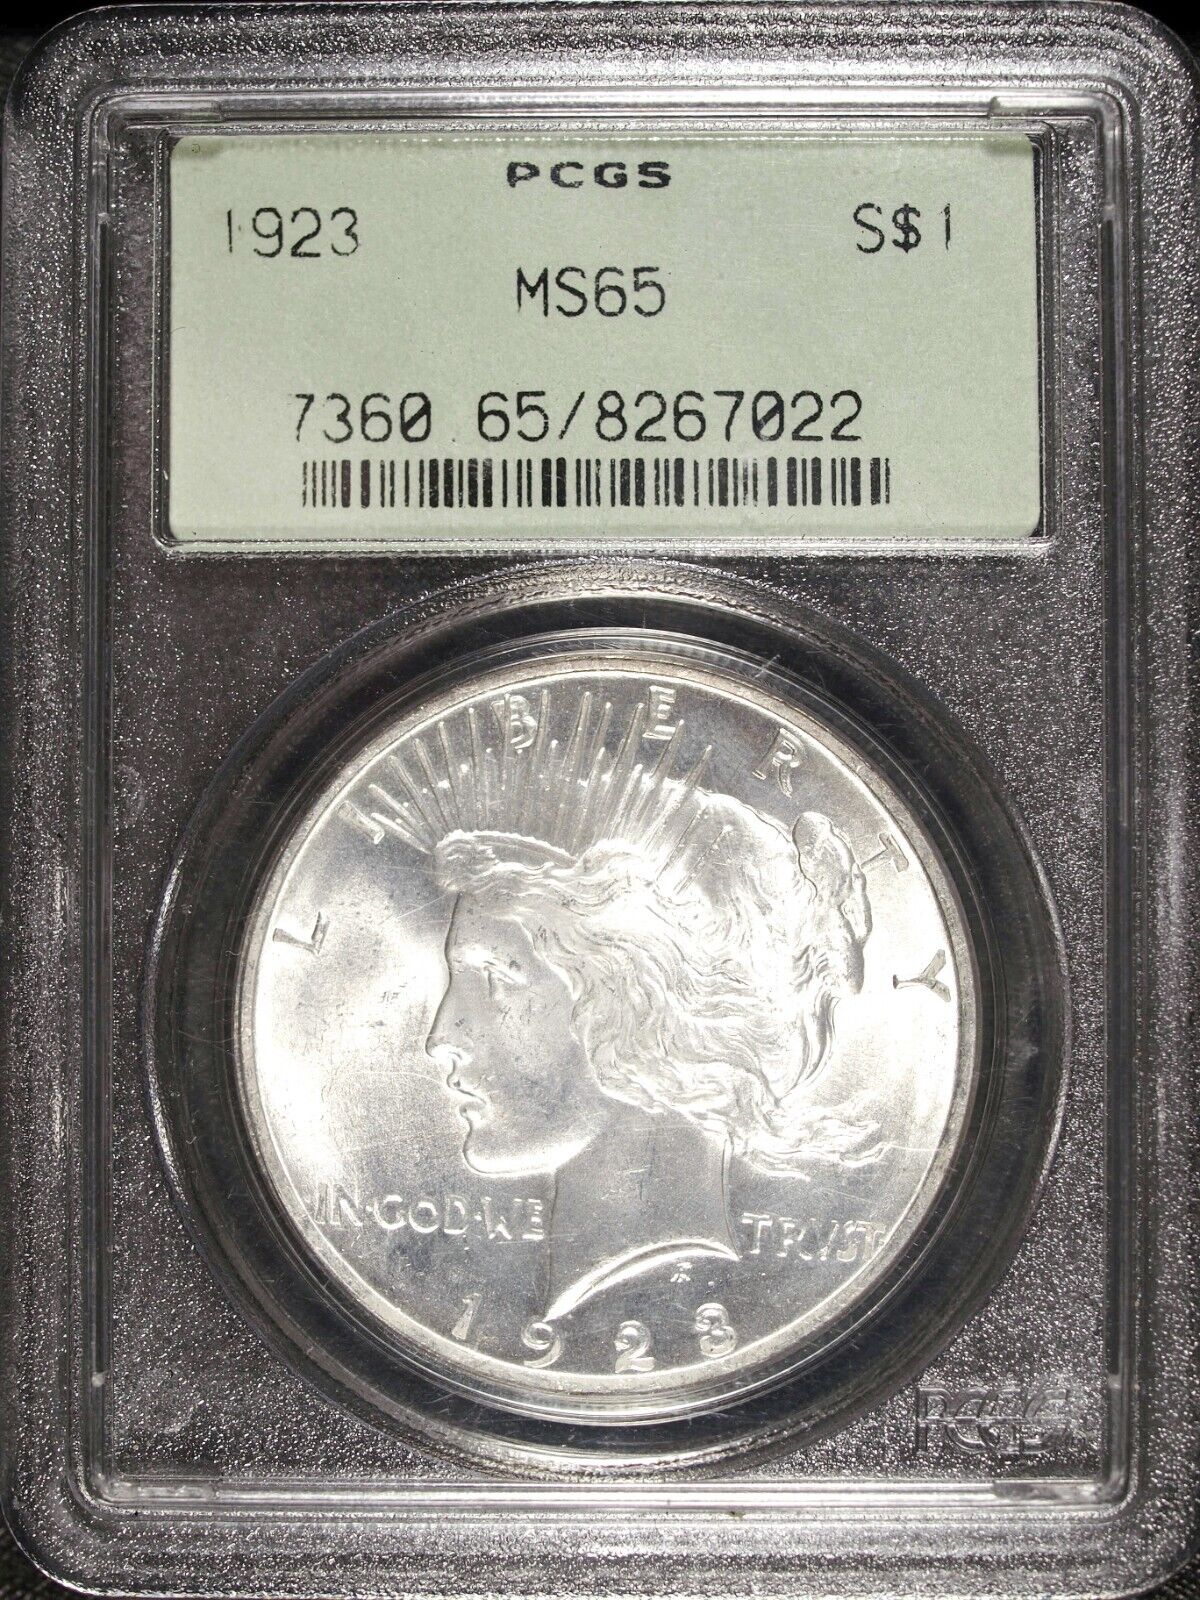 1923 P PCGS MS 65 Peace Silver Dollar ☆☆ Old Green Label ☆☆ Great For Sets 022